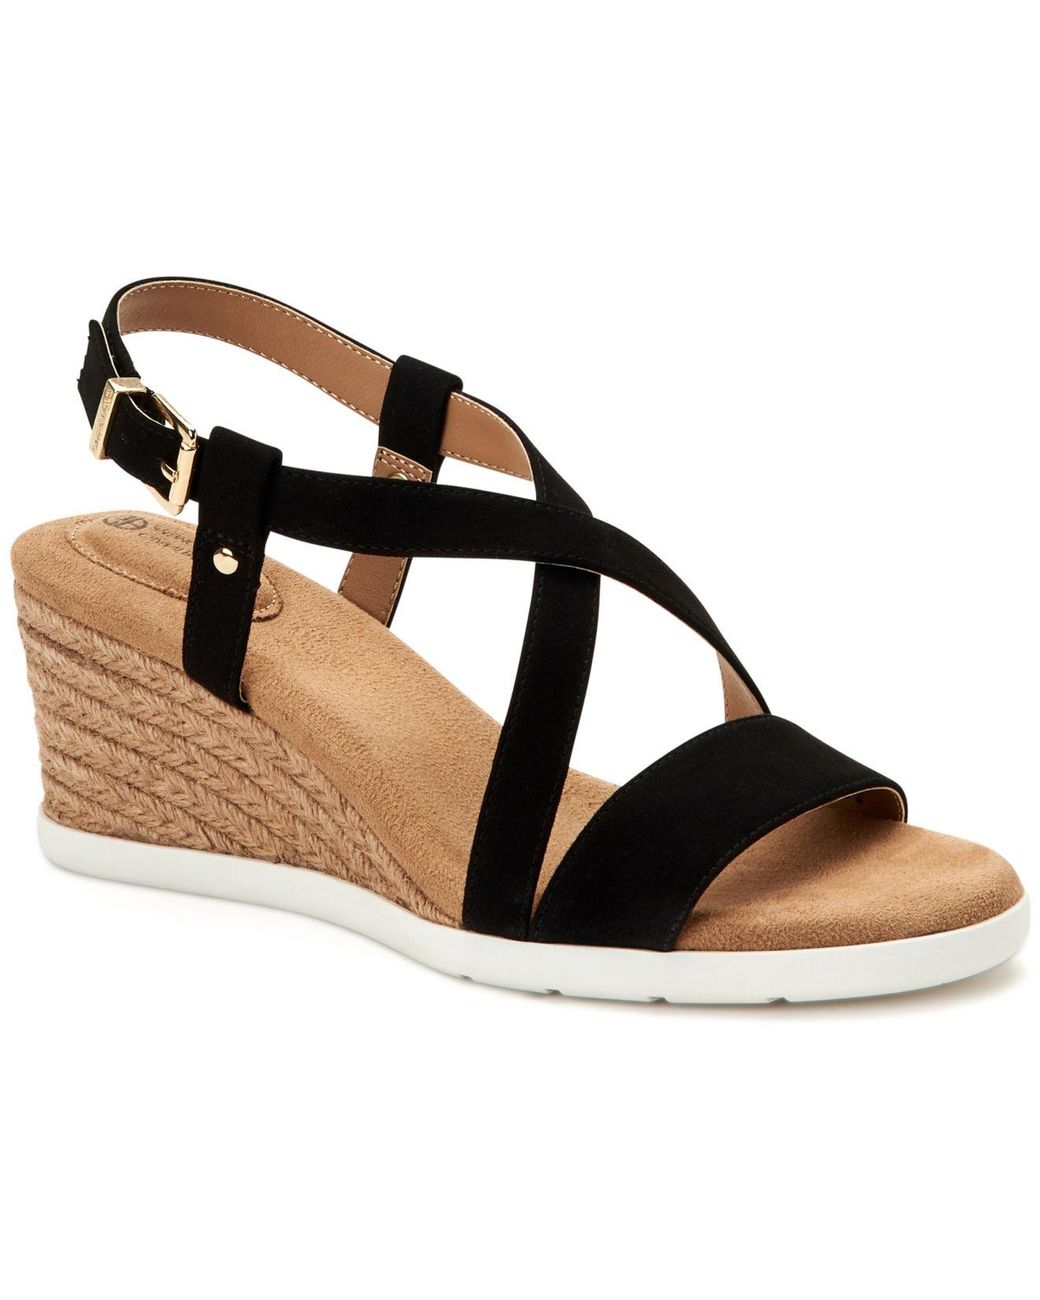 Giani Bernini Dellie Espadrille Wedge Sandals, Created For Macy's in ...